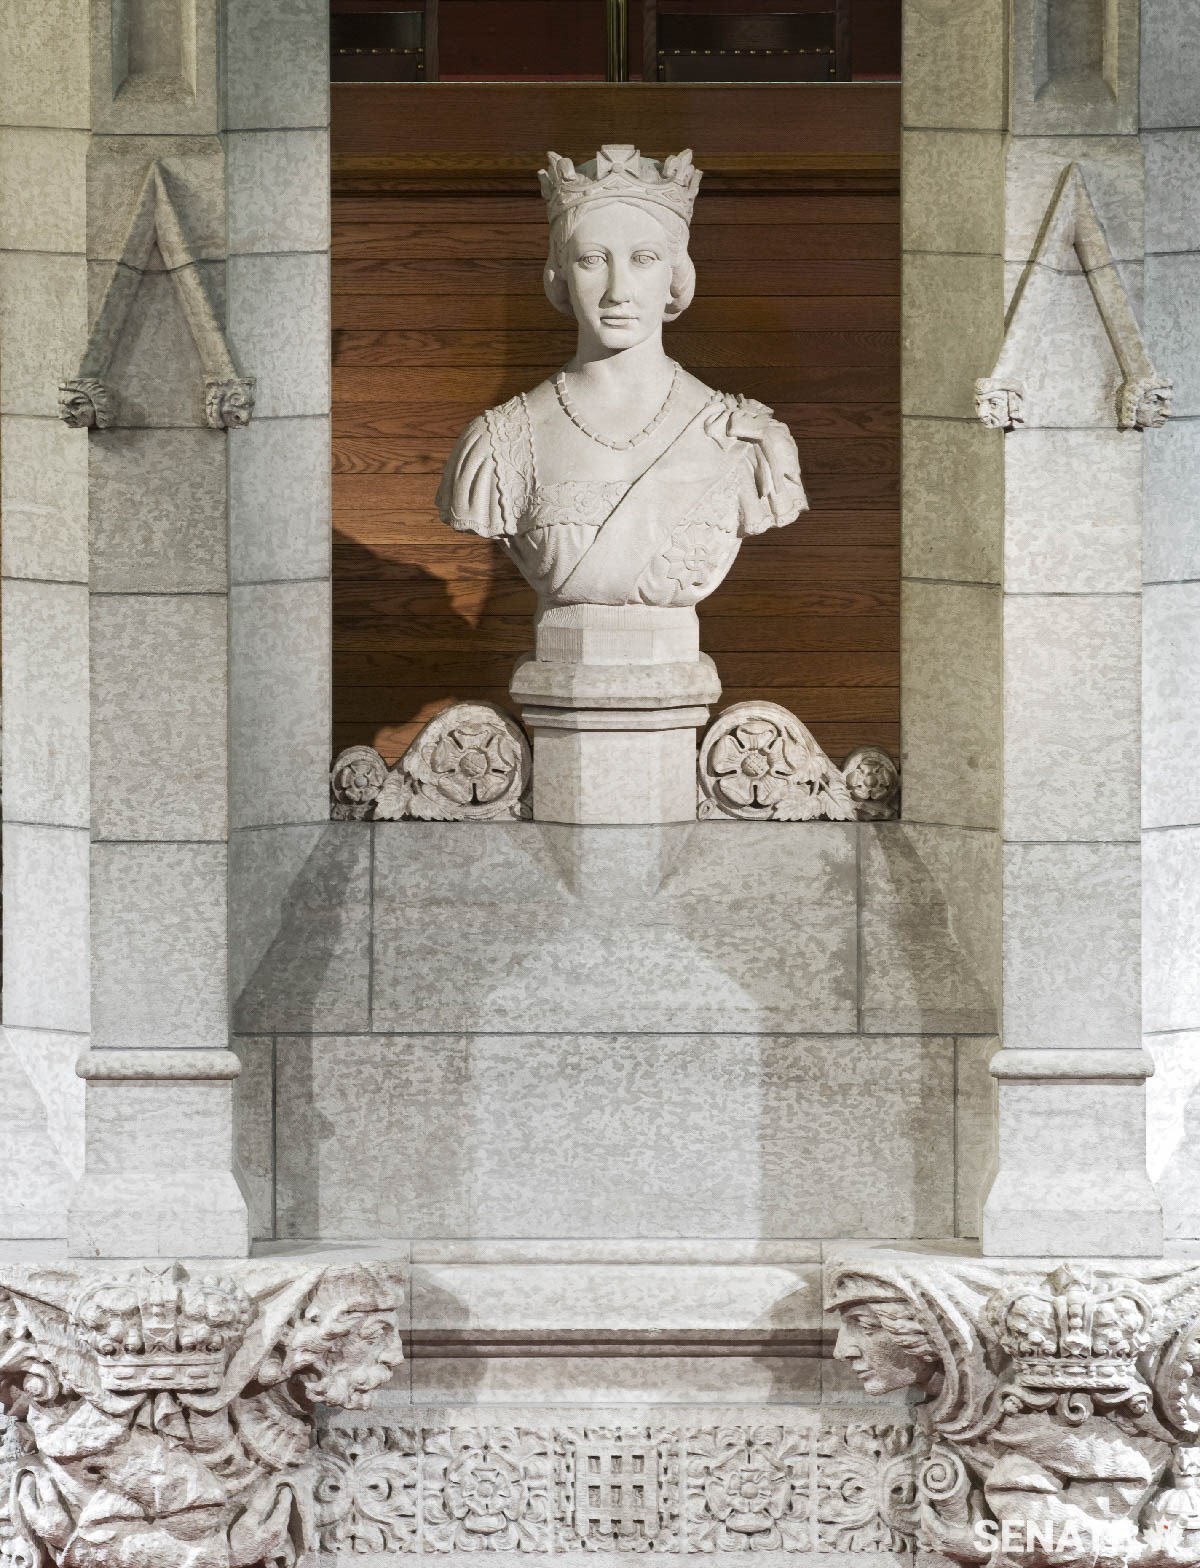 In the Senate Chamber, Cleóphas Soucy and his team created the backdrop to the Speaker’s dais. It’s decorated with stylized heads of medieval courtiers and topped with a marble bust of Queen Victoria.